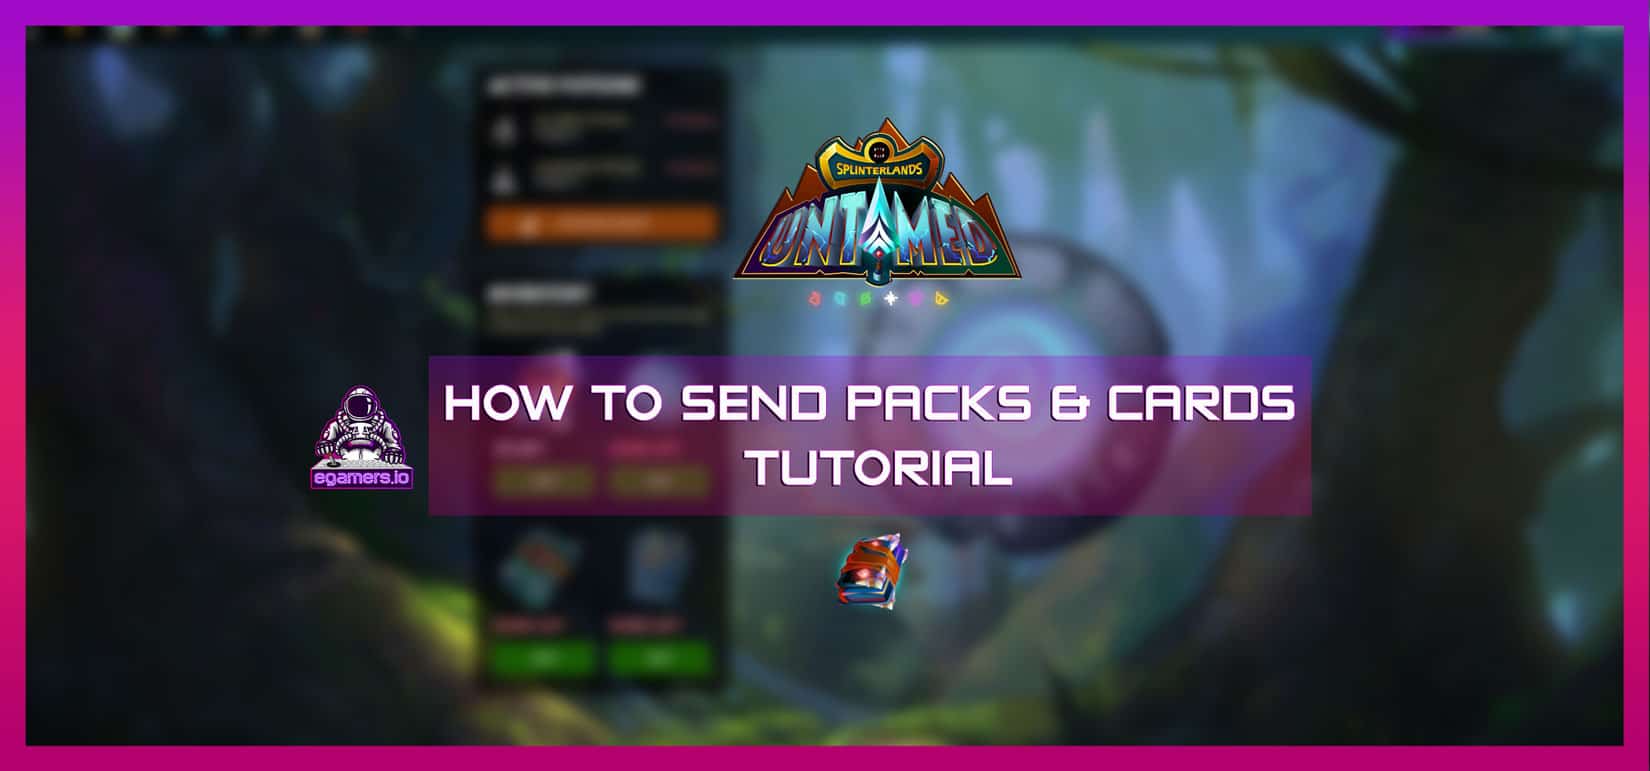 how to send splinterlands packs and cards to other users blockchain game For a limited time, the popular TCG blockchain game Gods Unchained offers  in ETH for everyone that completes a few simple missions.